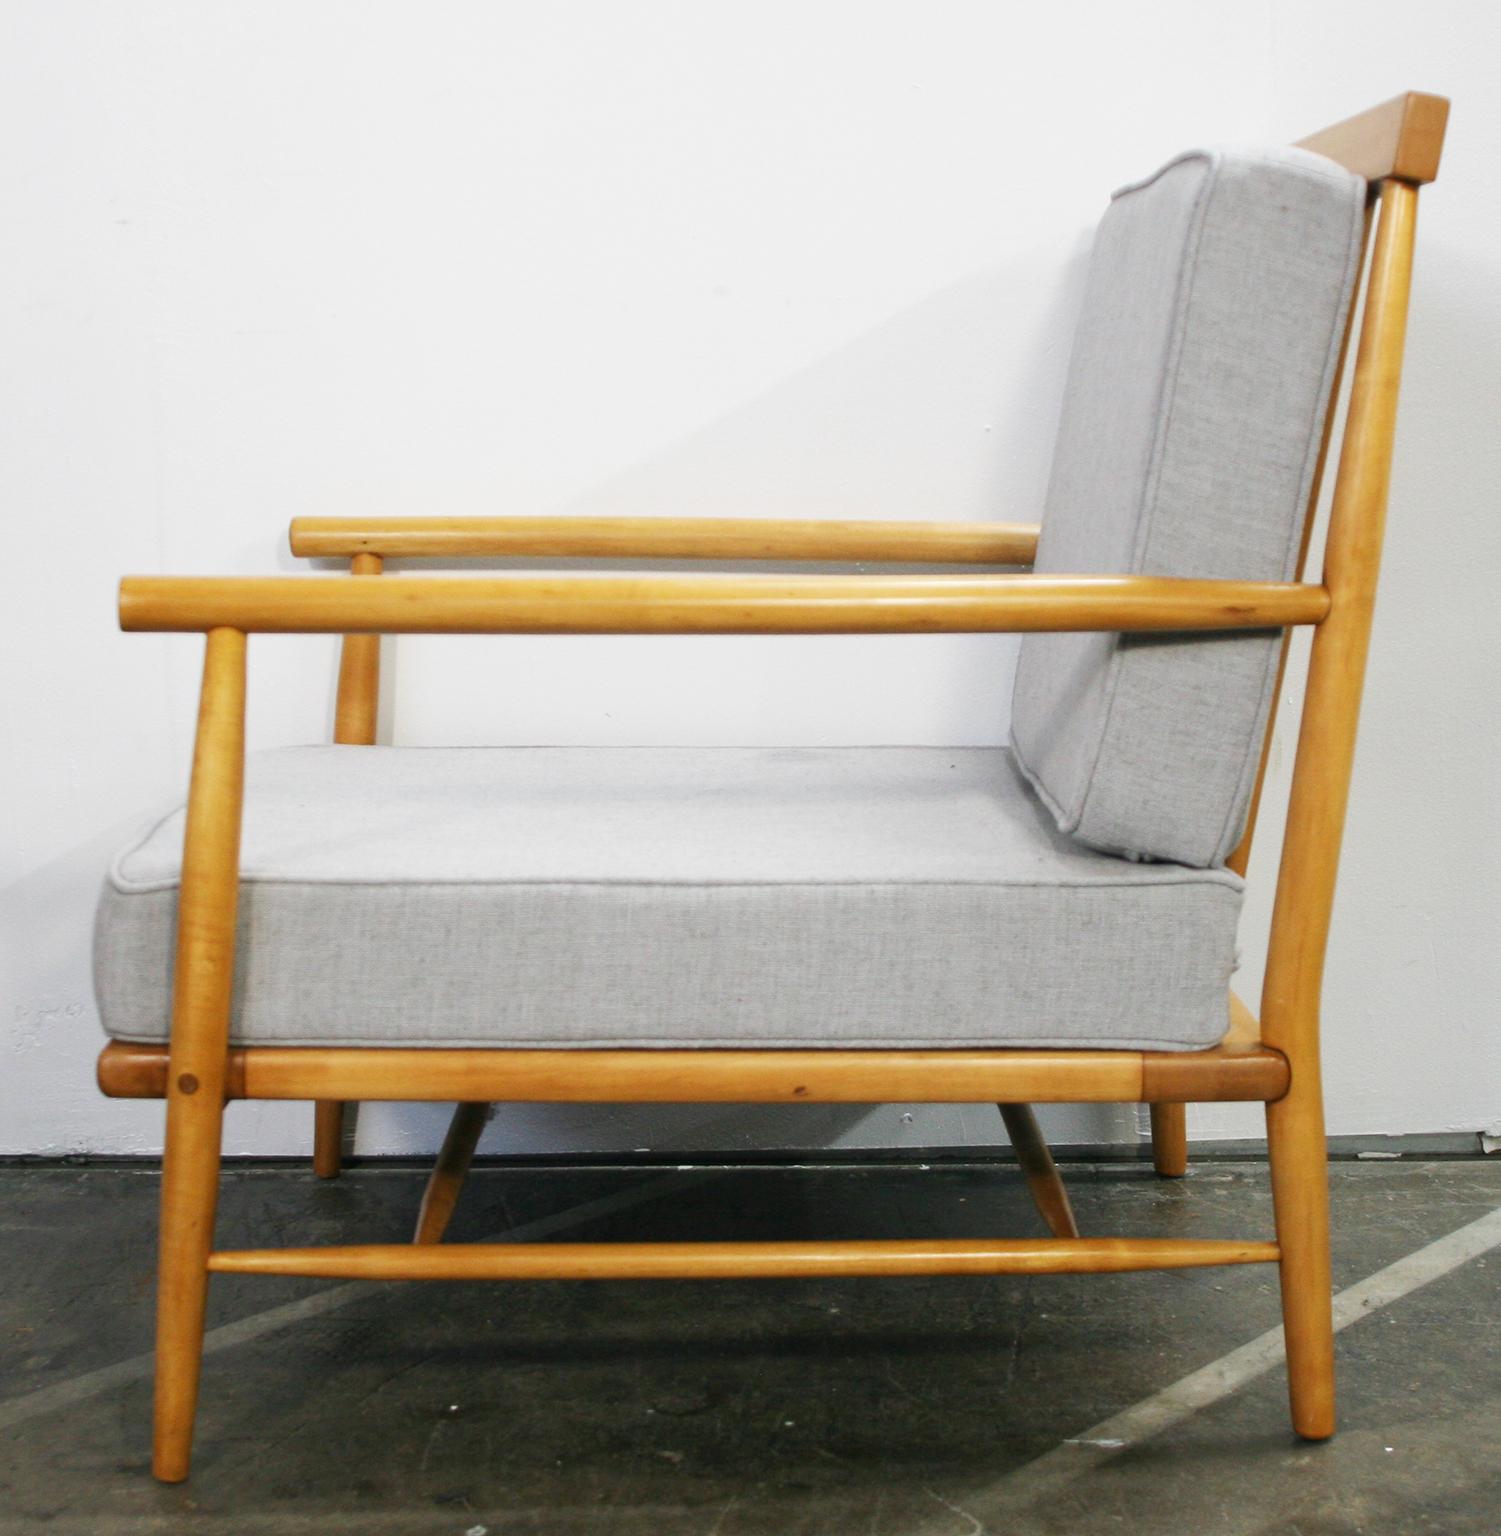 Original midcentury rare Paul McCobb predictor group low lounge chair by O'Hearn. Solid maple wood construction. Light gray woven upholstery in great shape. Beautiful low design. Designed by Paul McCobb made by O'Hearn. Very rare chair. Original